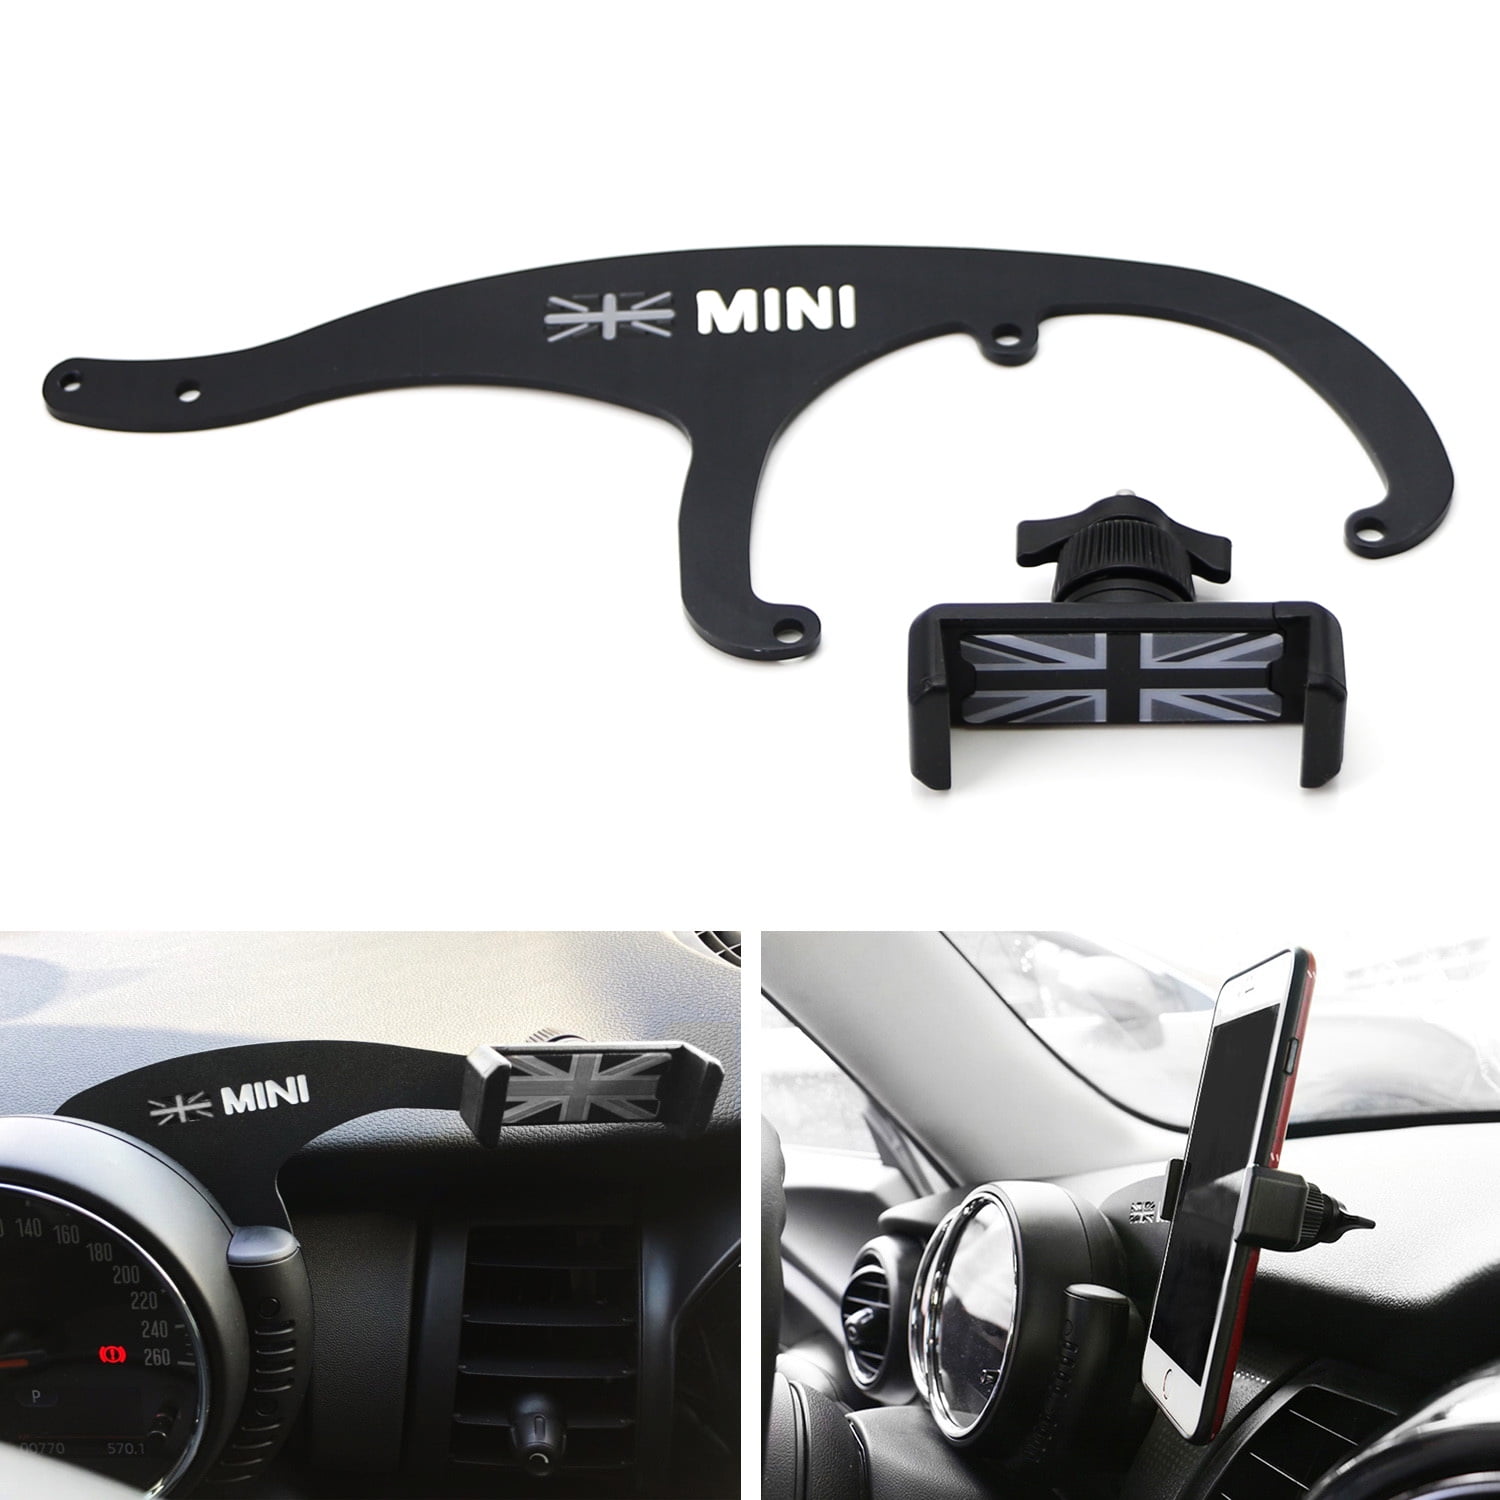 iJDMTOY Behind Tachometer Bolt-On Mount Cell Phone GPS Black Holder Compatible with Mini Cooper R50 R52 R53 